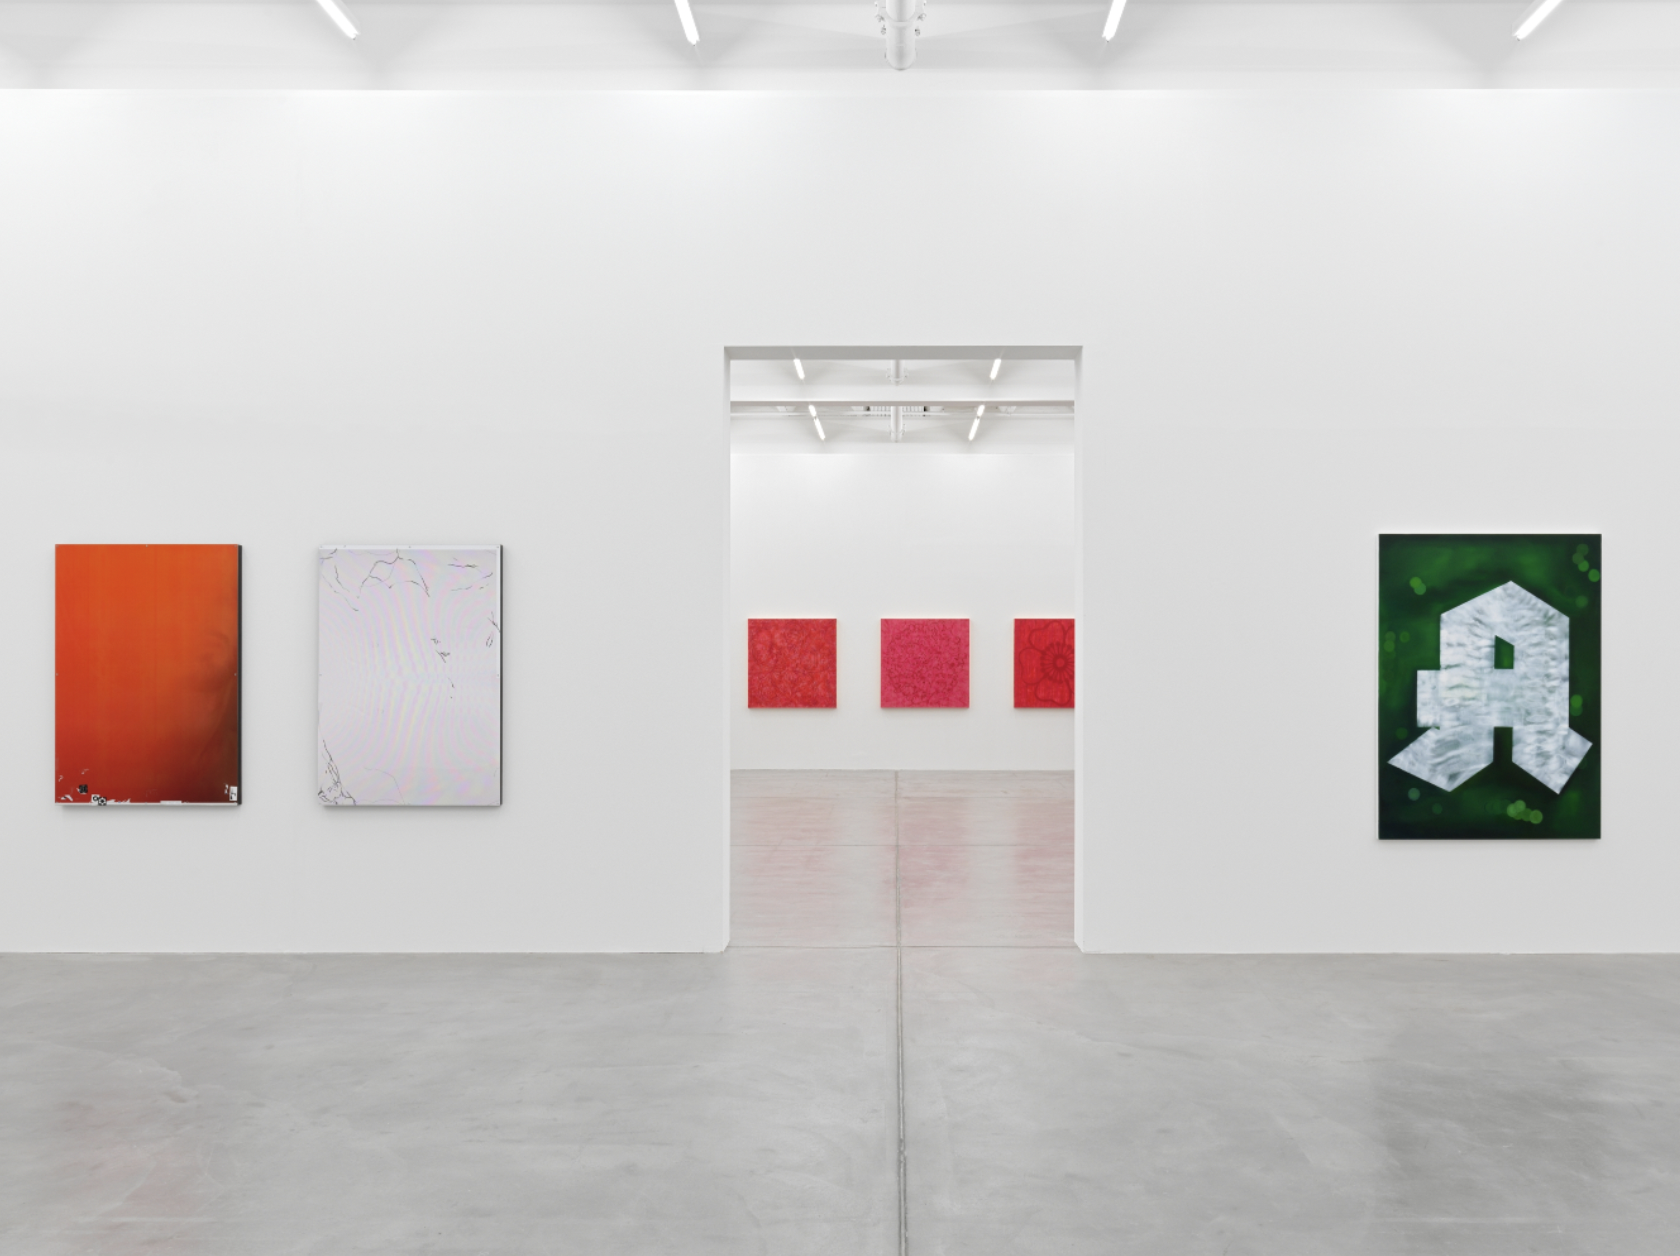 Installation view with works by Damien Juillard, Mitchell Anderson, and Laura Langer